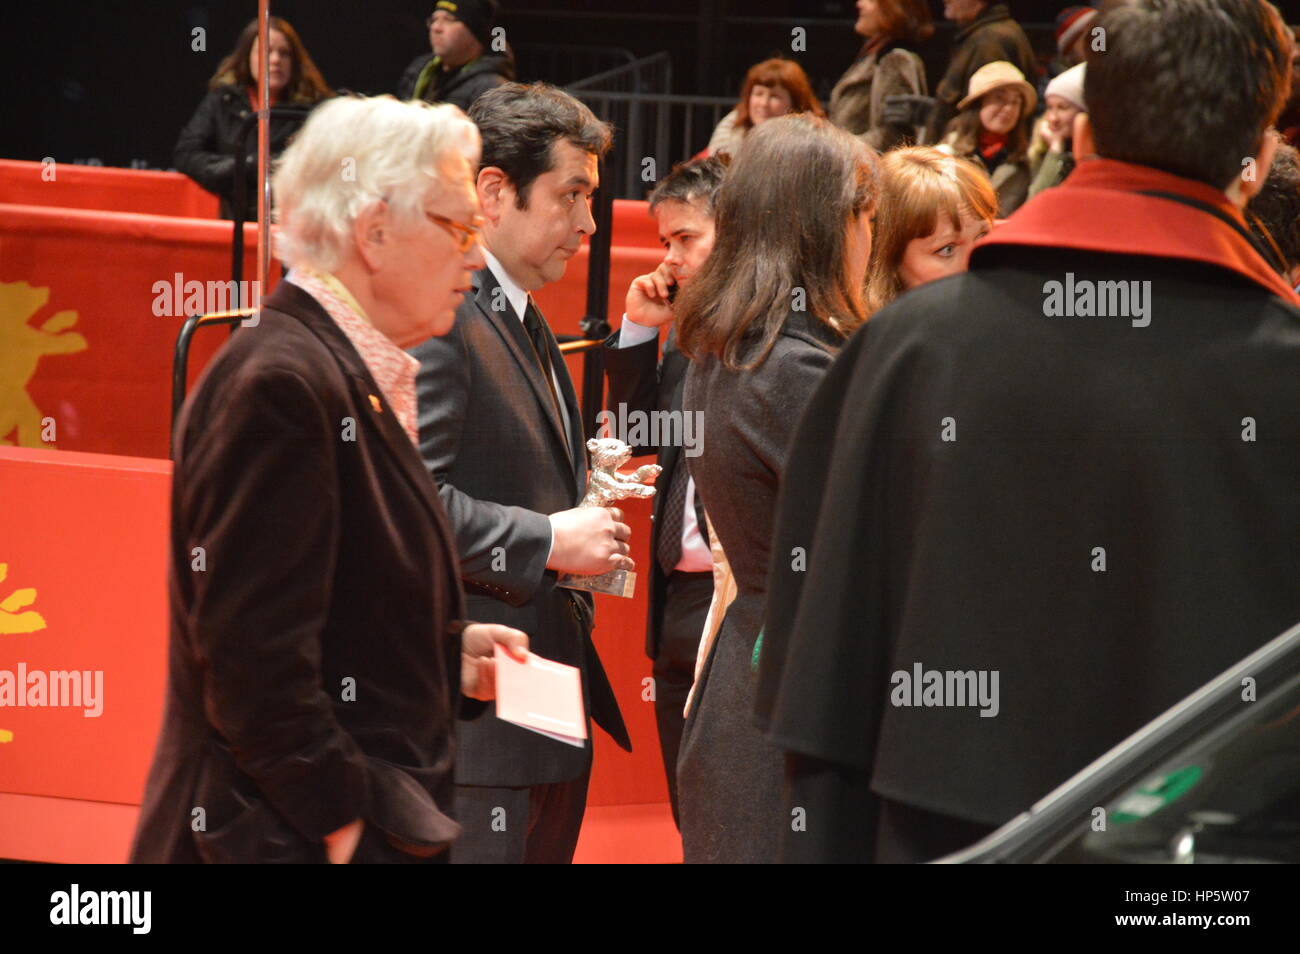 Sebastián Lelio and Gonzalo Maza winners at the Silver Baer at the Berlinale film festival in Berlin, Germany. Stock Photo